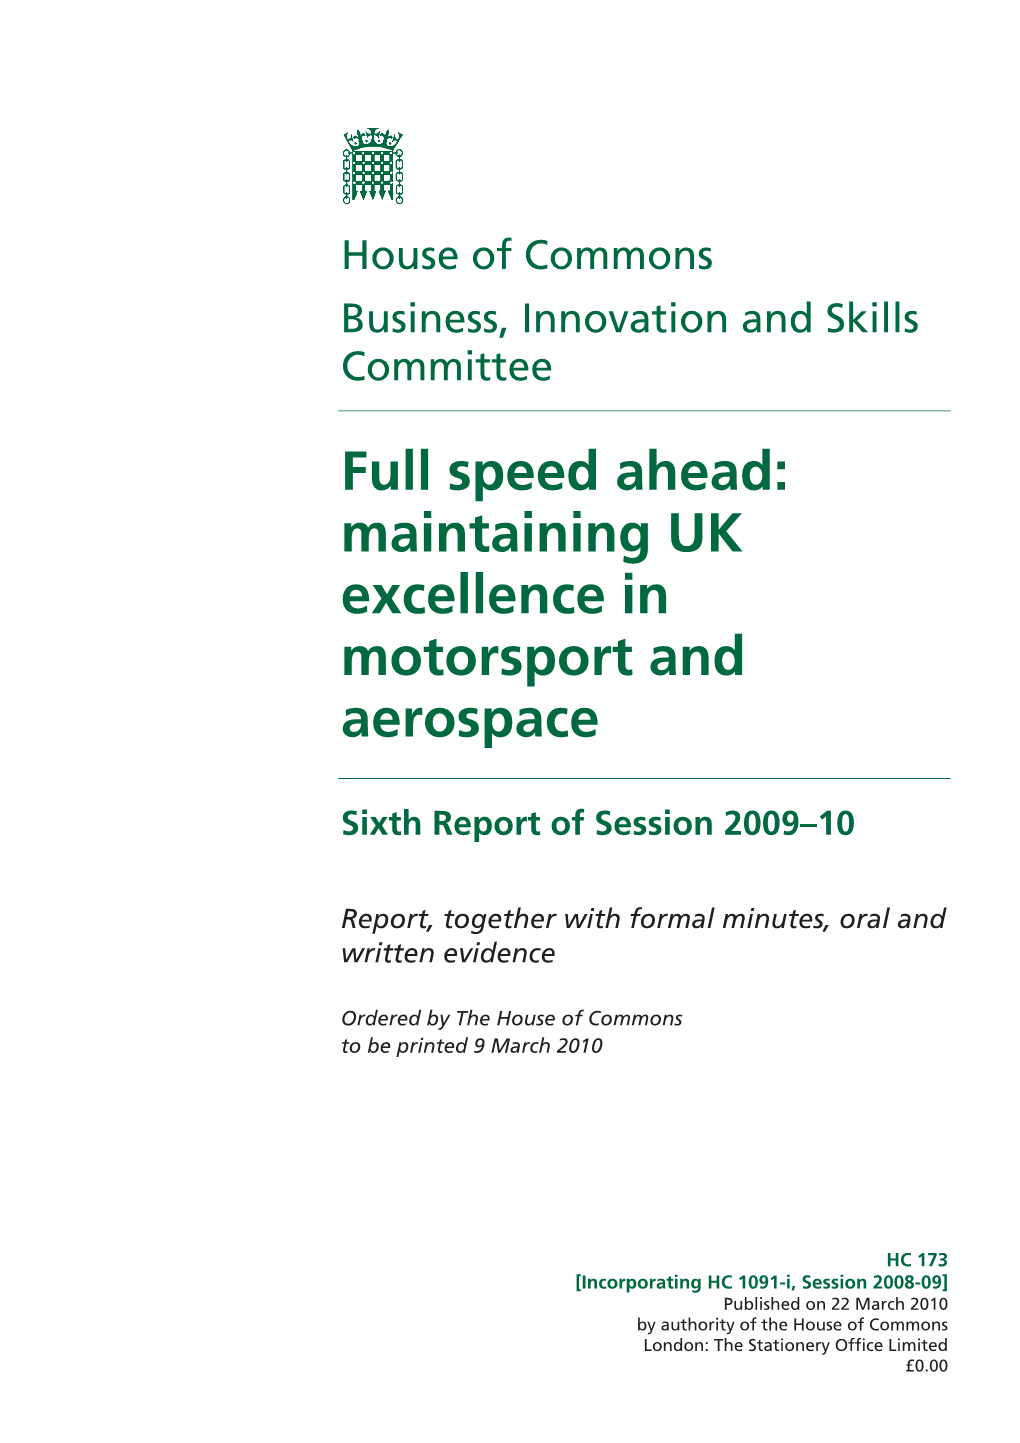 Full Speed Ahead: Maintaining UK Excellence in Motorsport and Aerospace